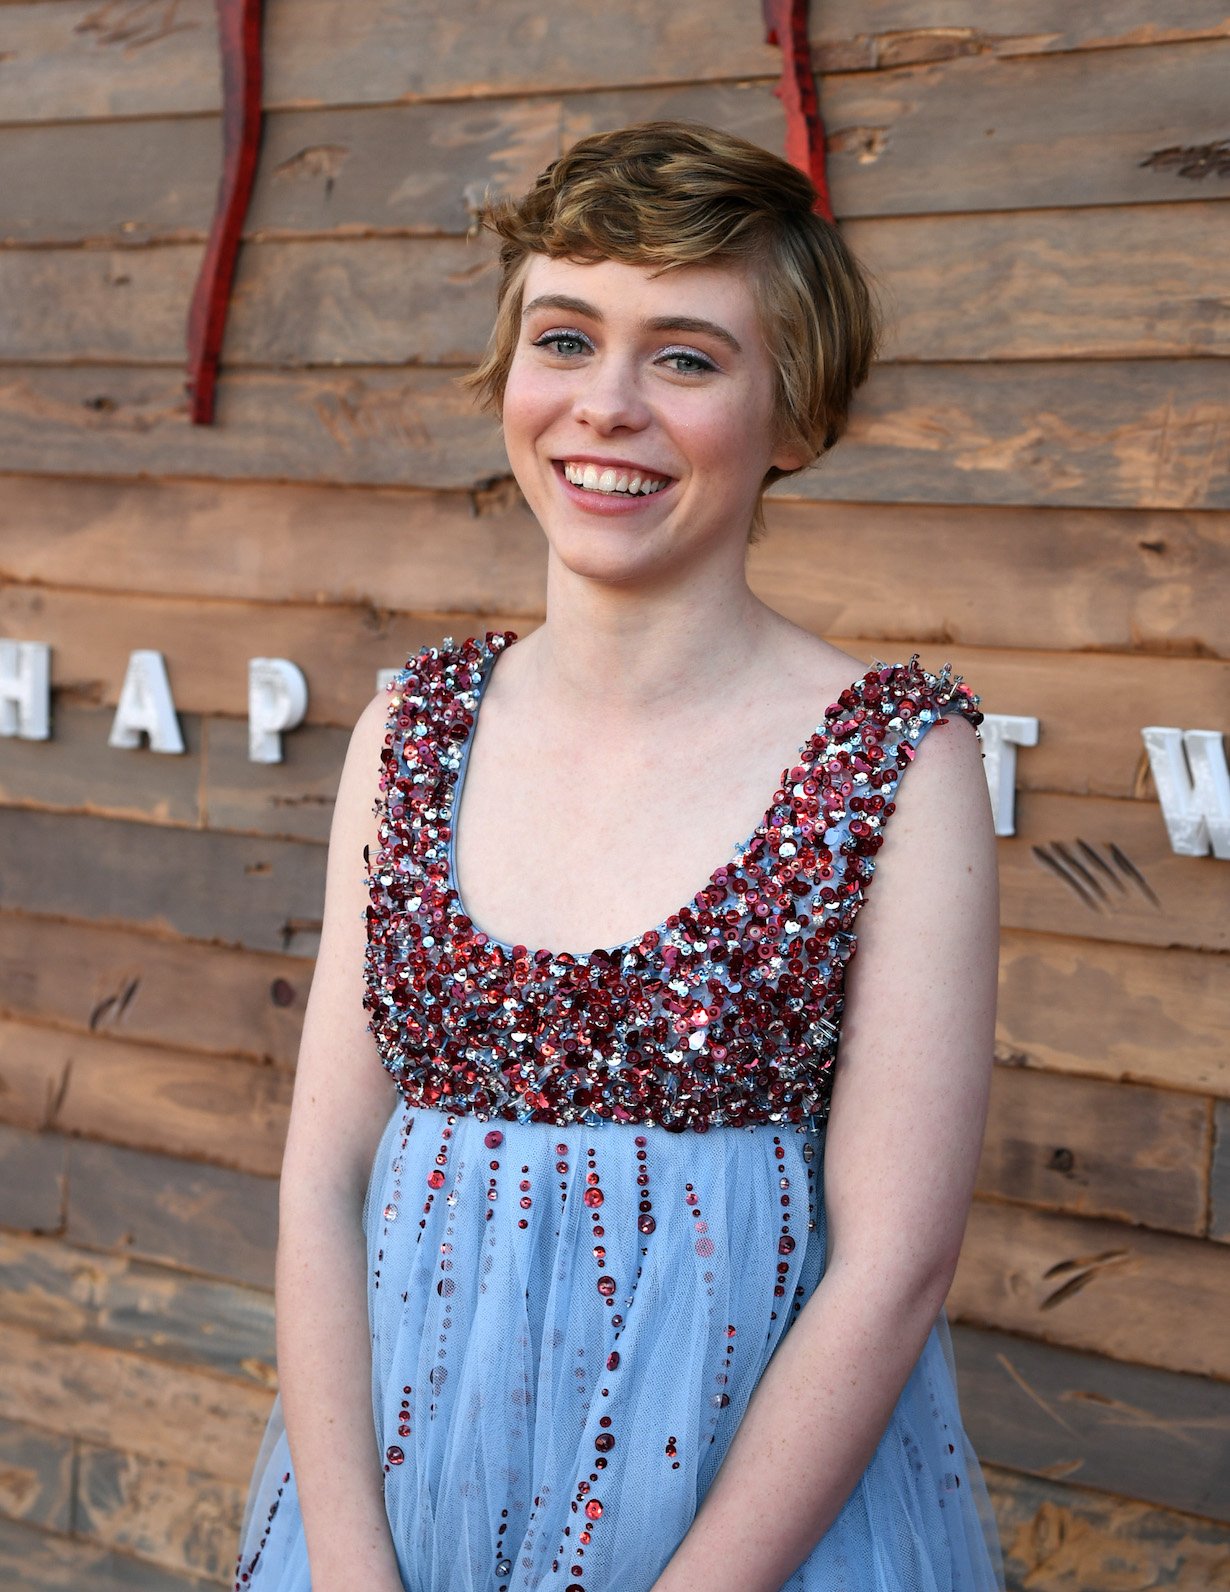 Sophia Lillis arrives at the premiere of Warner Bros. Pictures" "It Chapter Two"